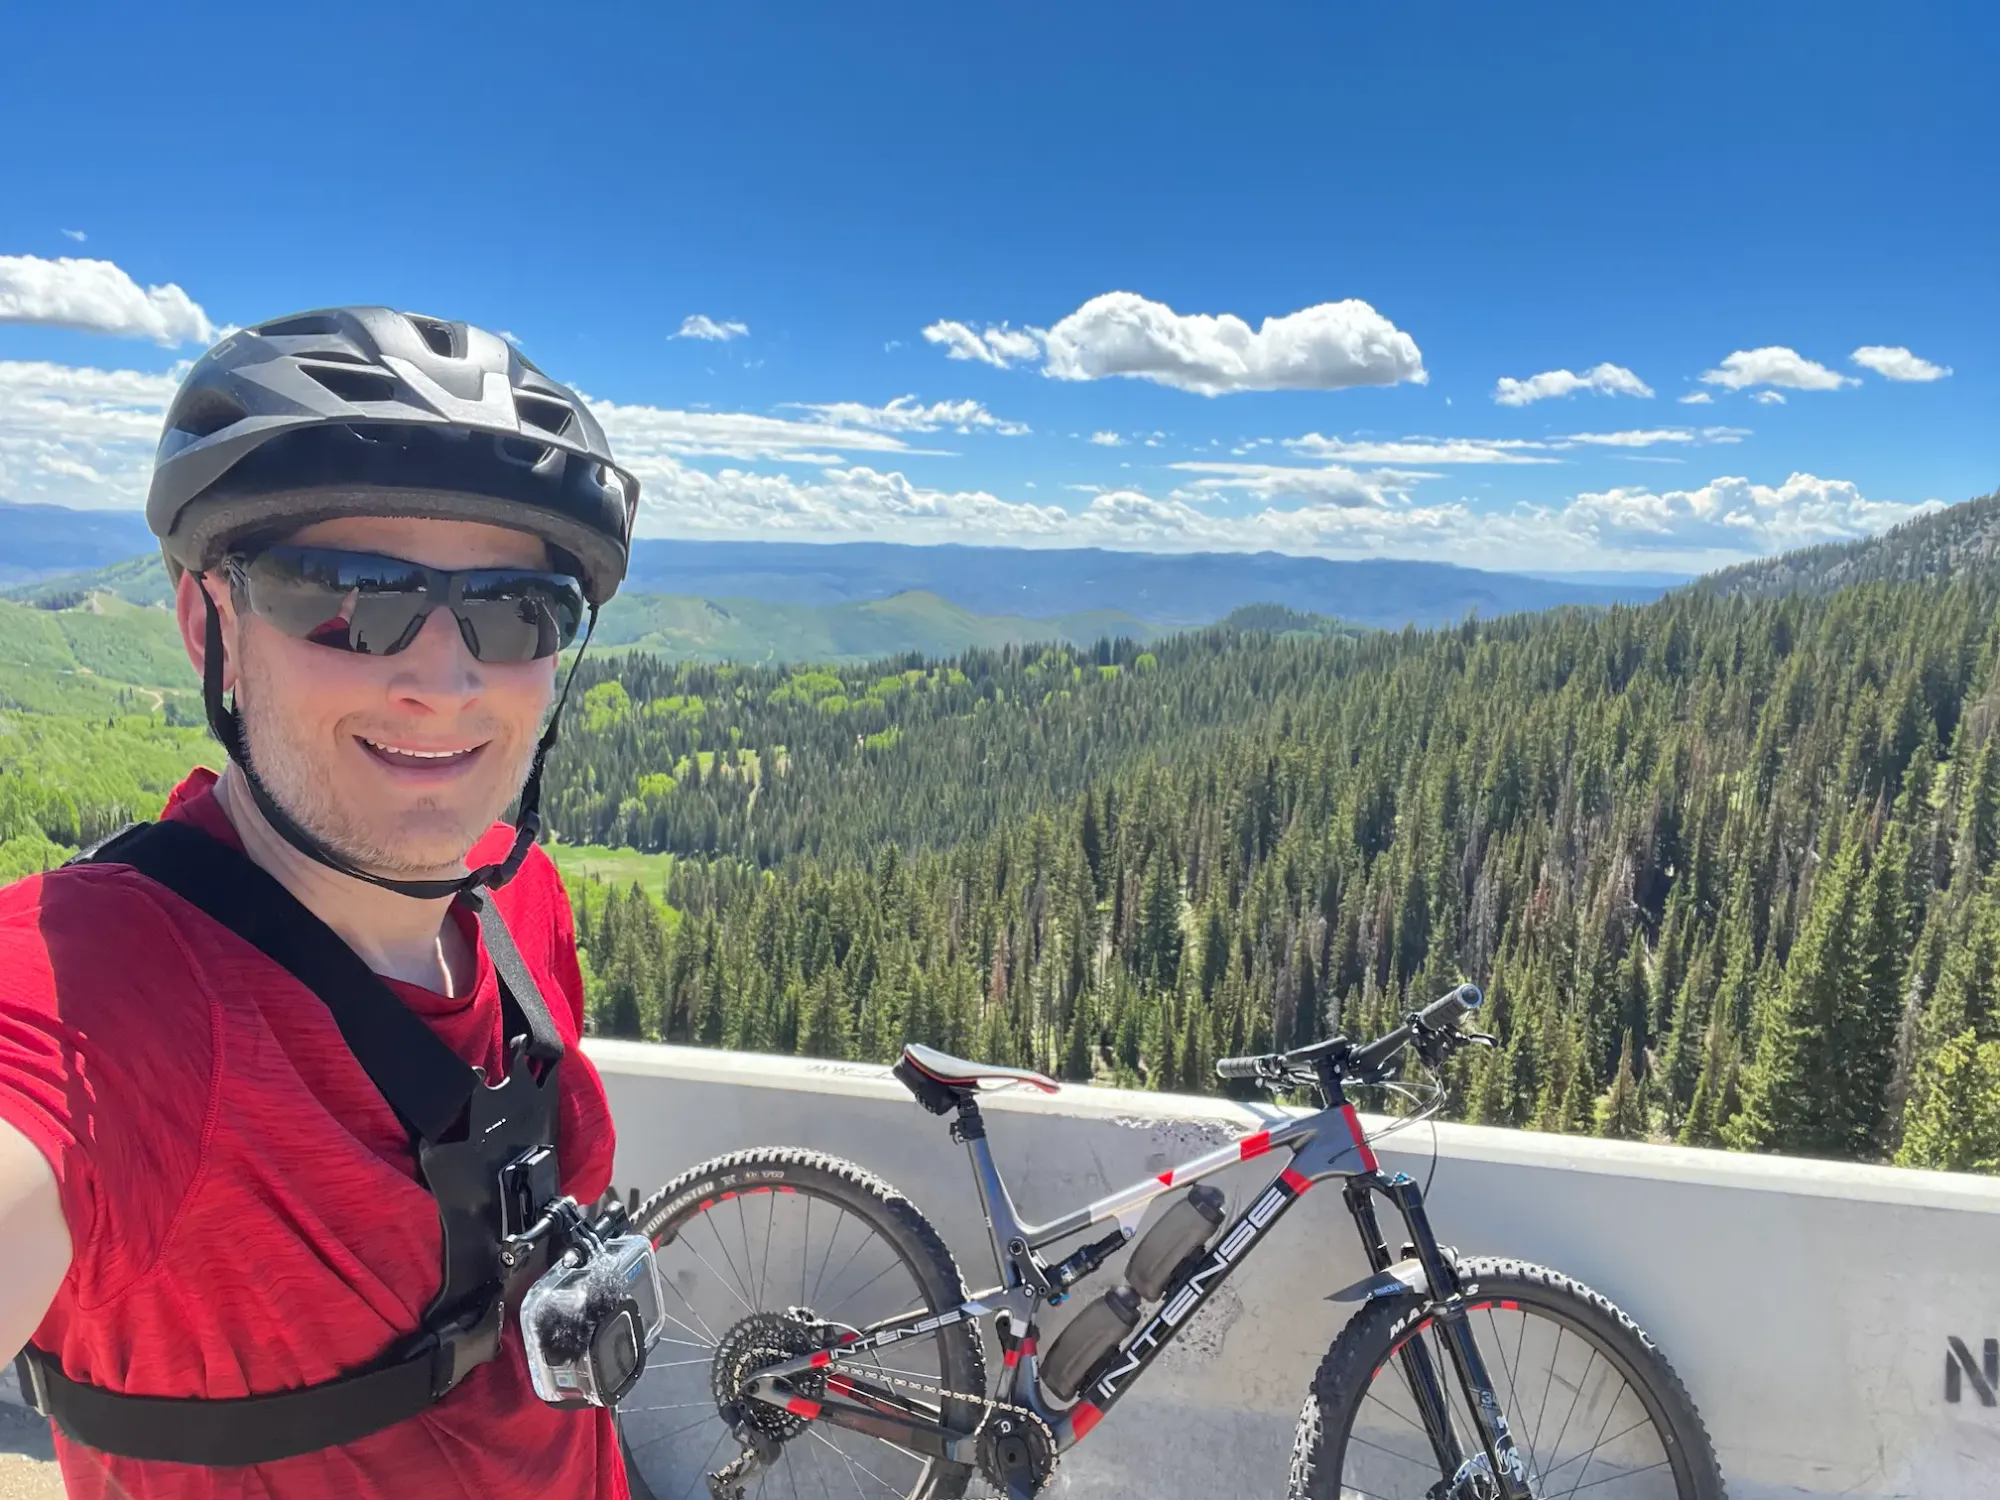 Keith is wearing a GoPro action camera while out on a mountain bike ride in the Wasatch Mountains